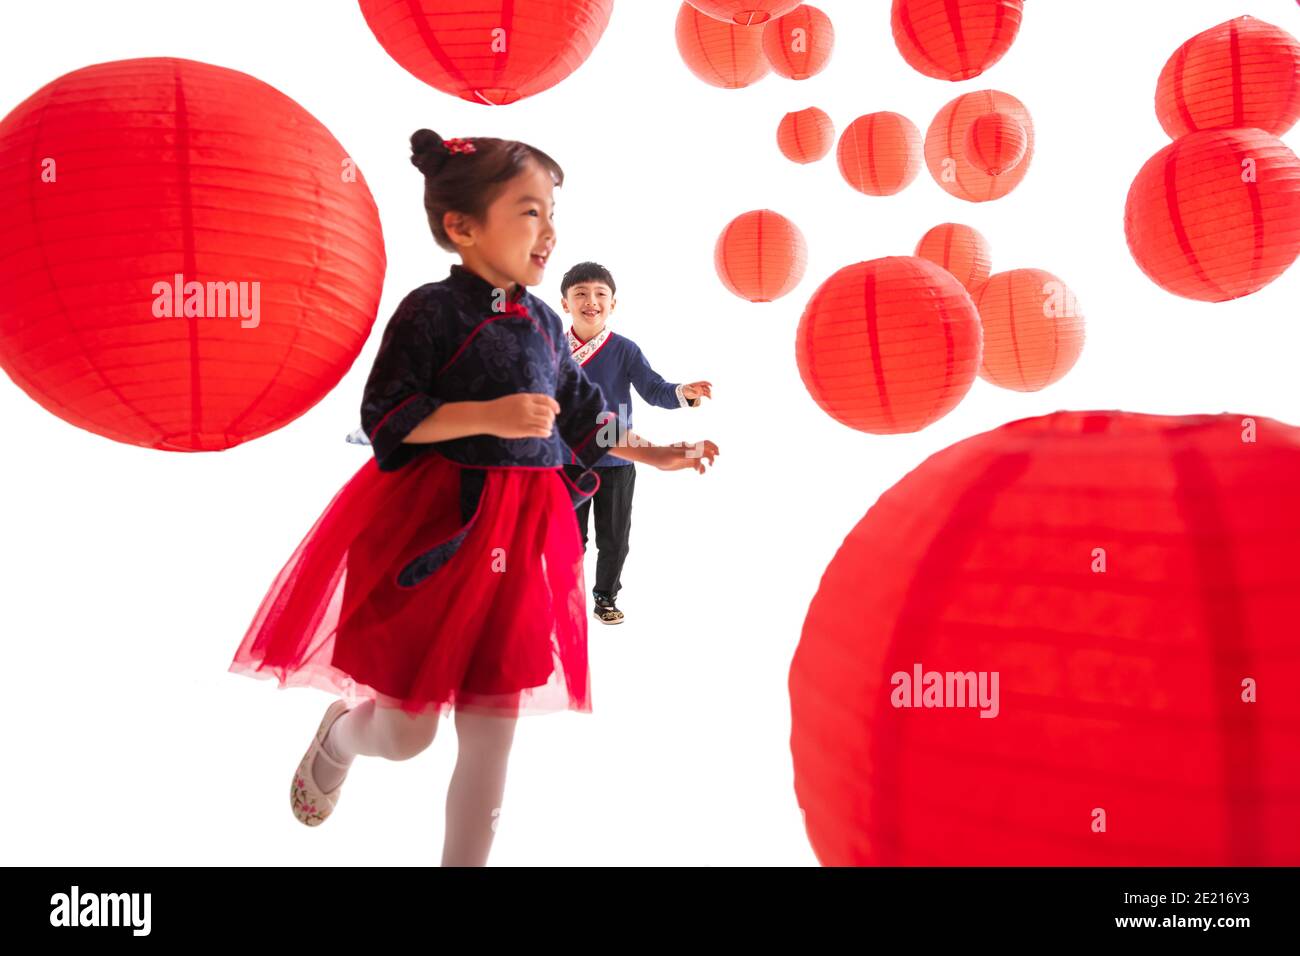 Boys and girls playing under the red lanterns Stock Photo